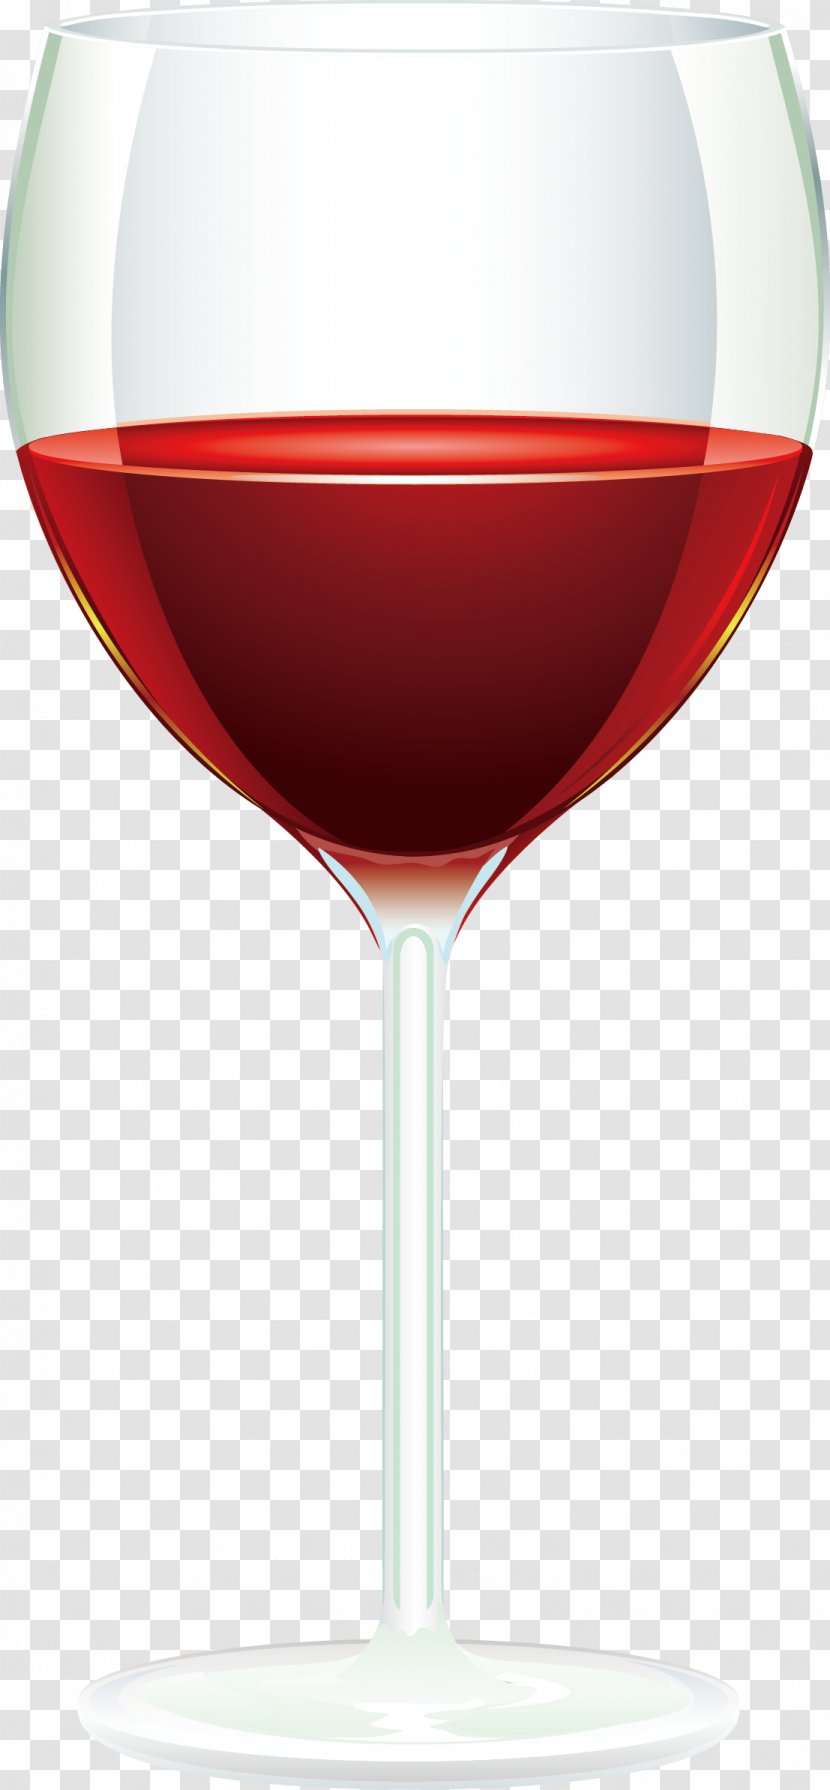 Red Wine Cocktail Glass - Cup Design Appreciation Transparent PNG